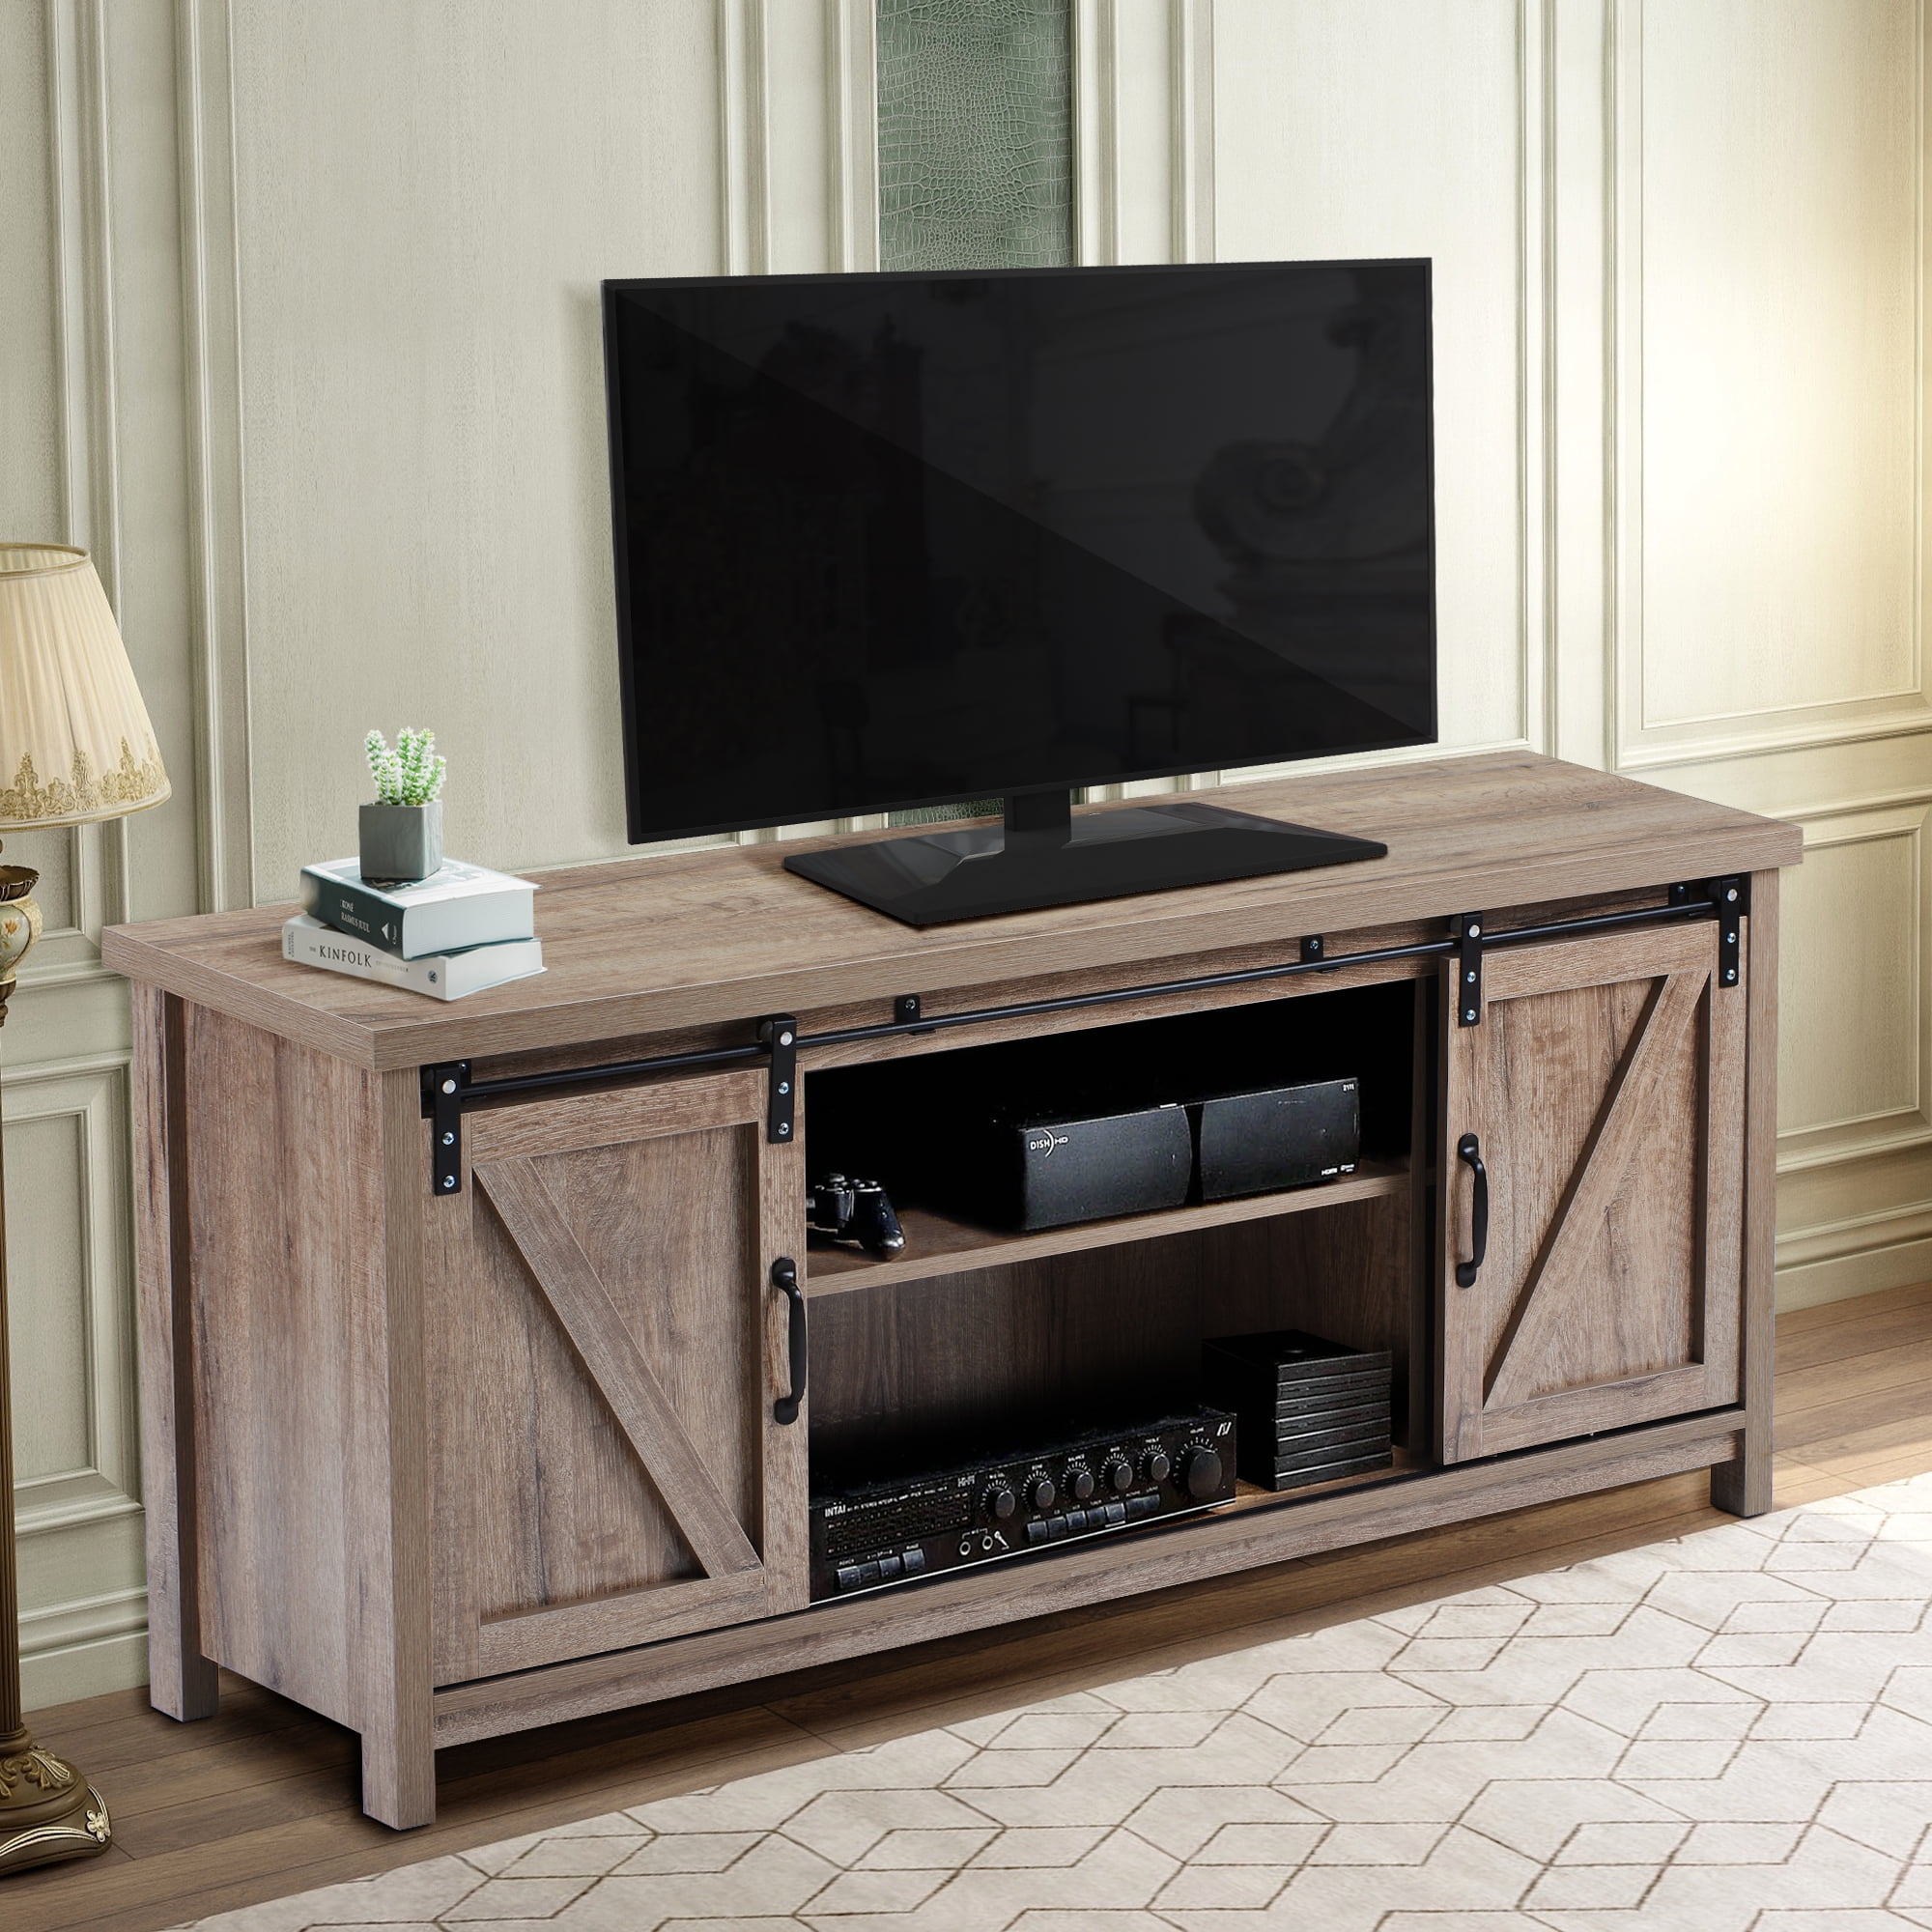 Modern Farmhouse TV Stand for TVs up to 60", TV Cabinet for Living Room